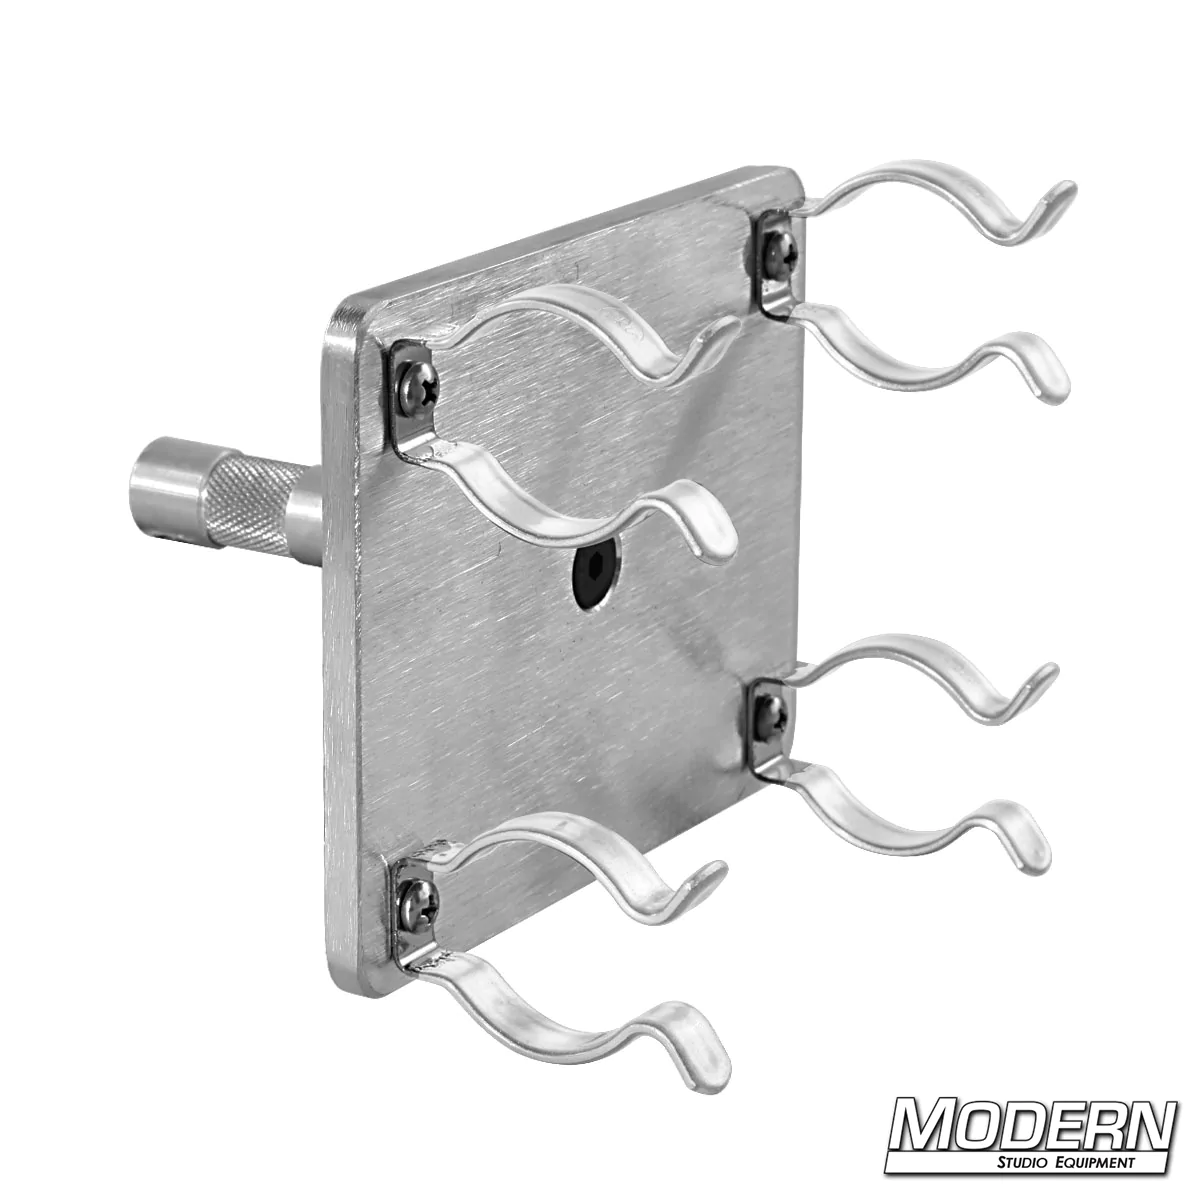 Dual Fluorescent T12 Lamp Holder with 5/8" Pin and Rubber Clips